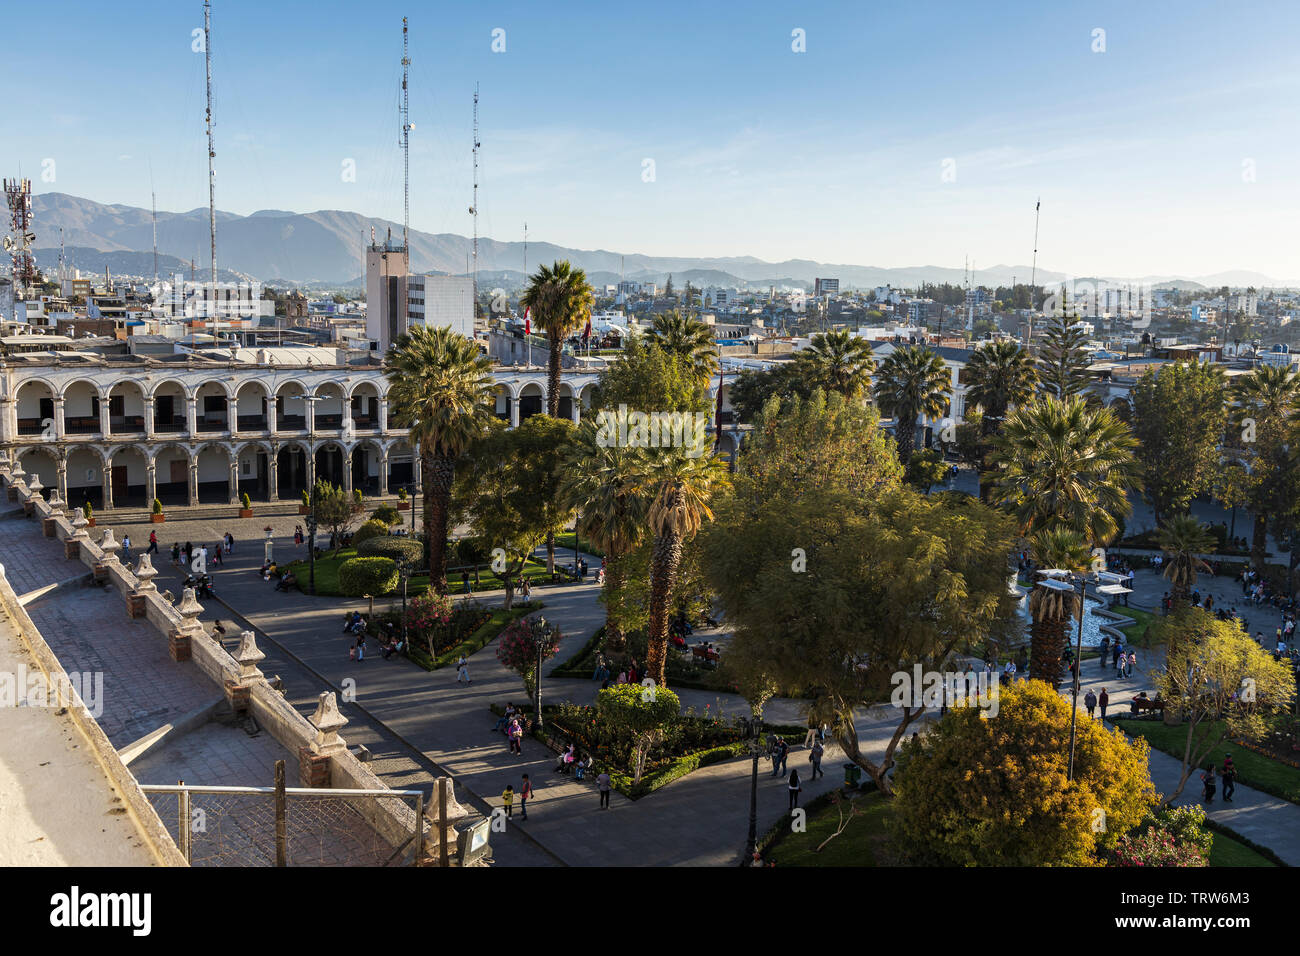 Overlooking the Plaza de Armas in Arequipa, Peru, South America Stock Photo